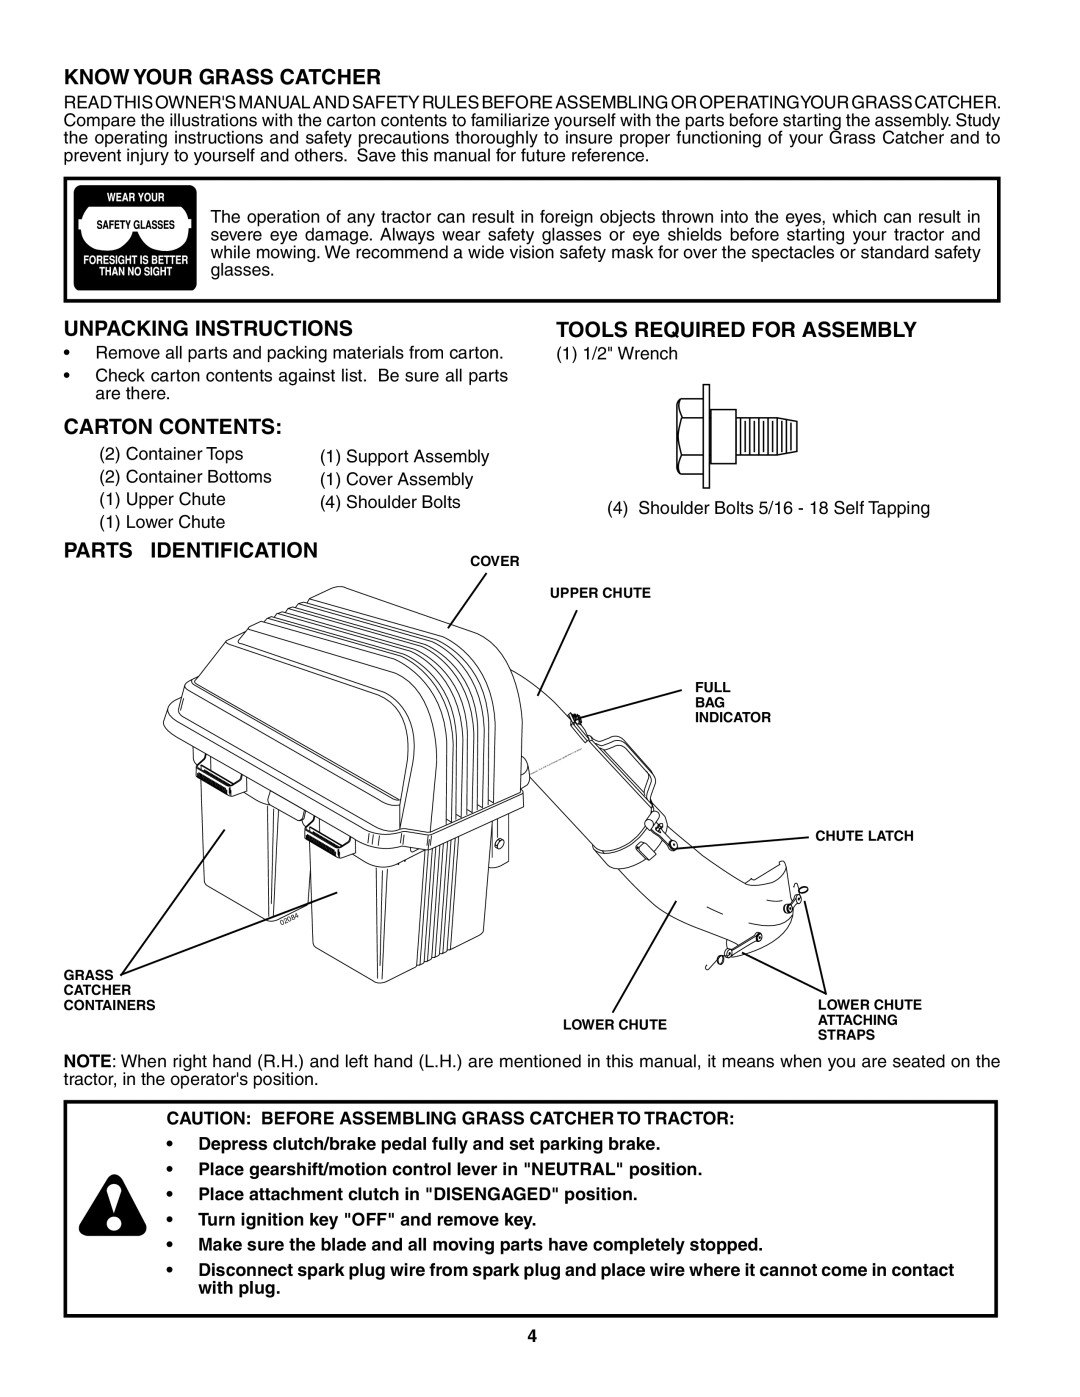 Husqvarna QCT42 owner manual Know Your Grass Catcher, Unpacking Instructions, Carton Contents, Parts Identification 